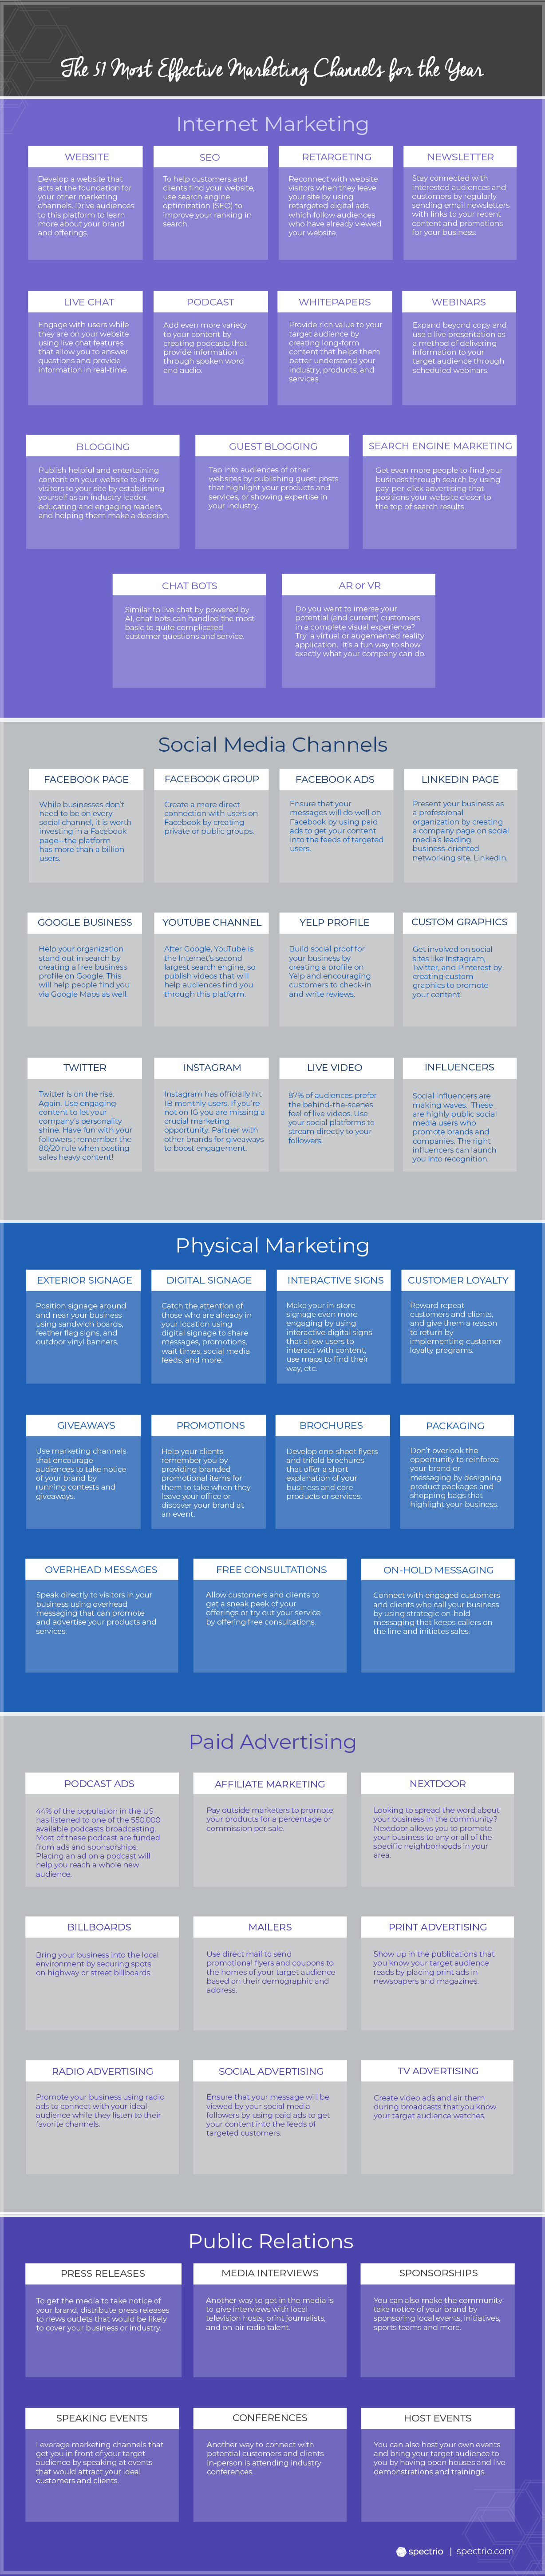 Most Effective Marketing Channels Infographic by Spectrio